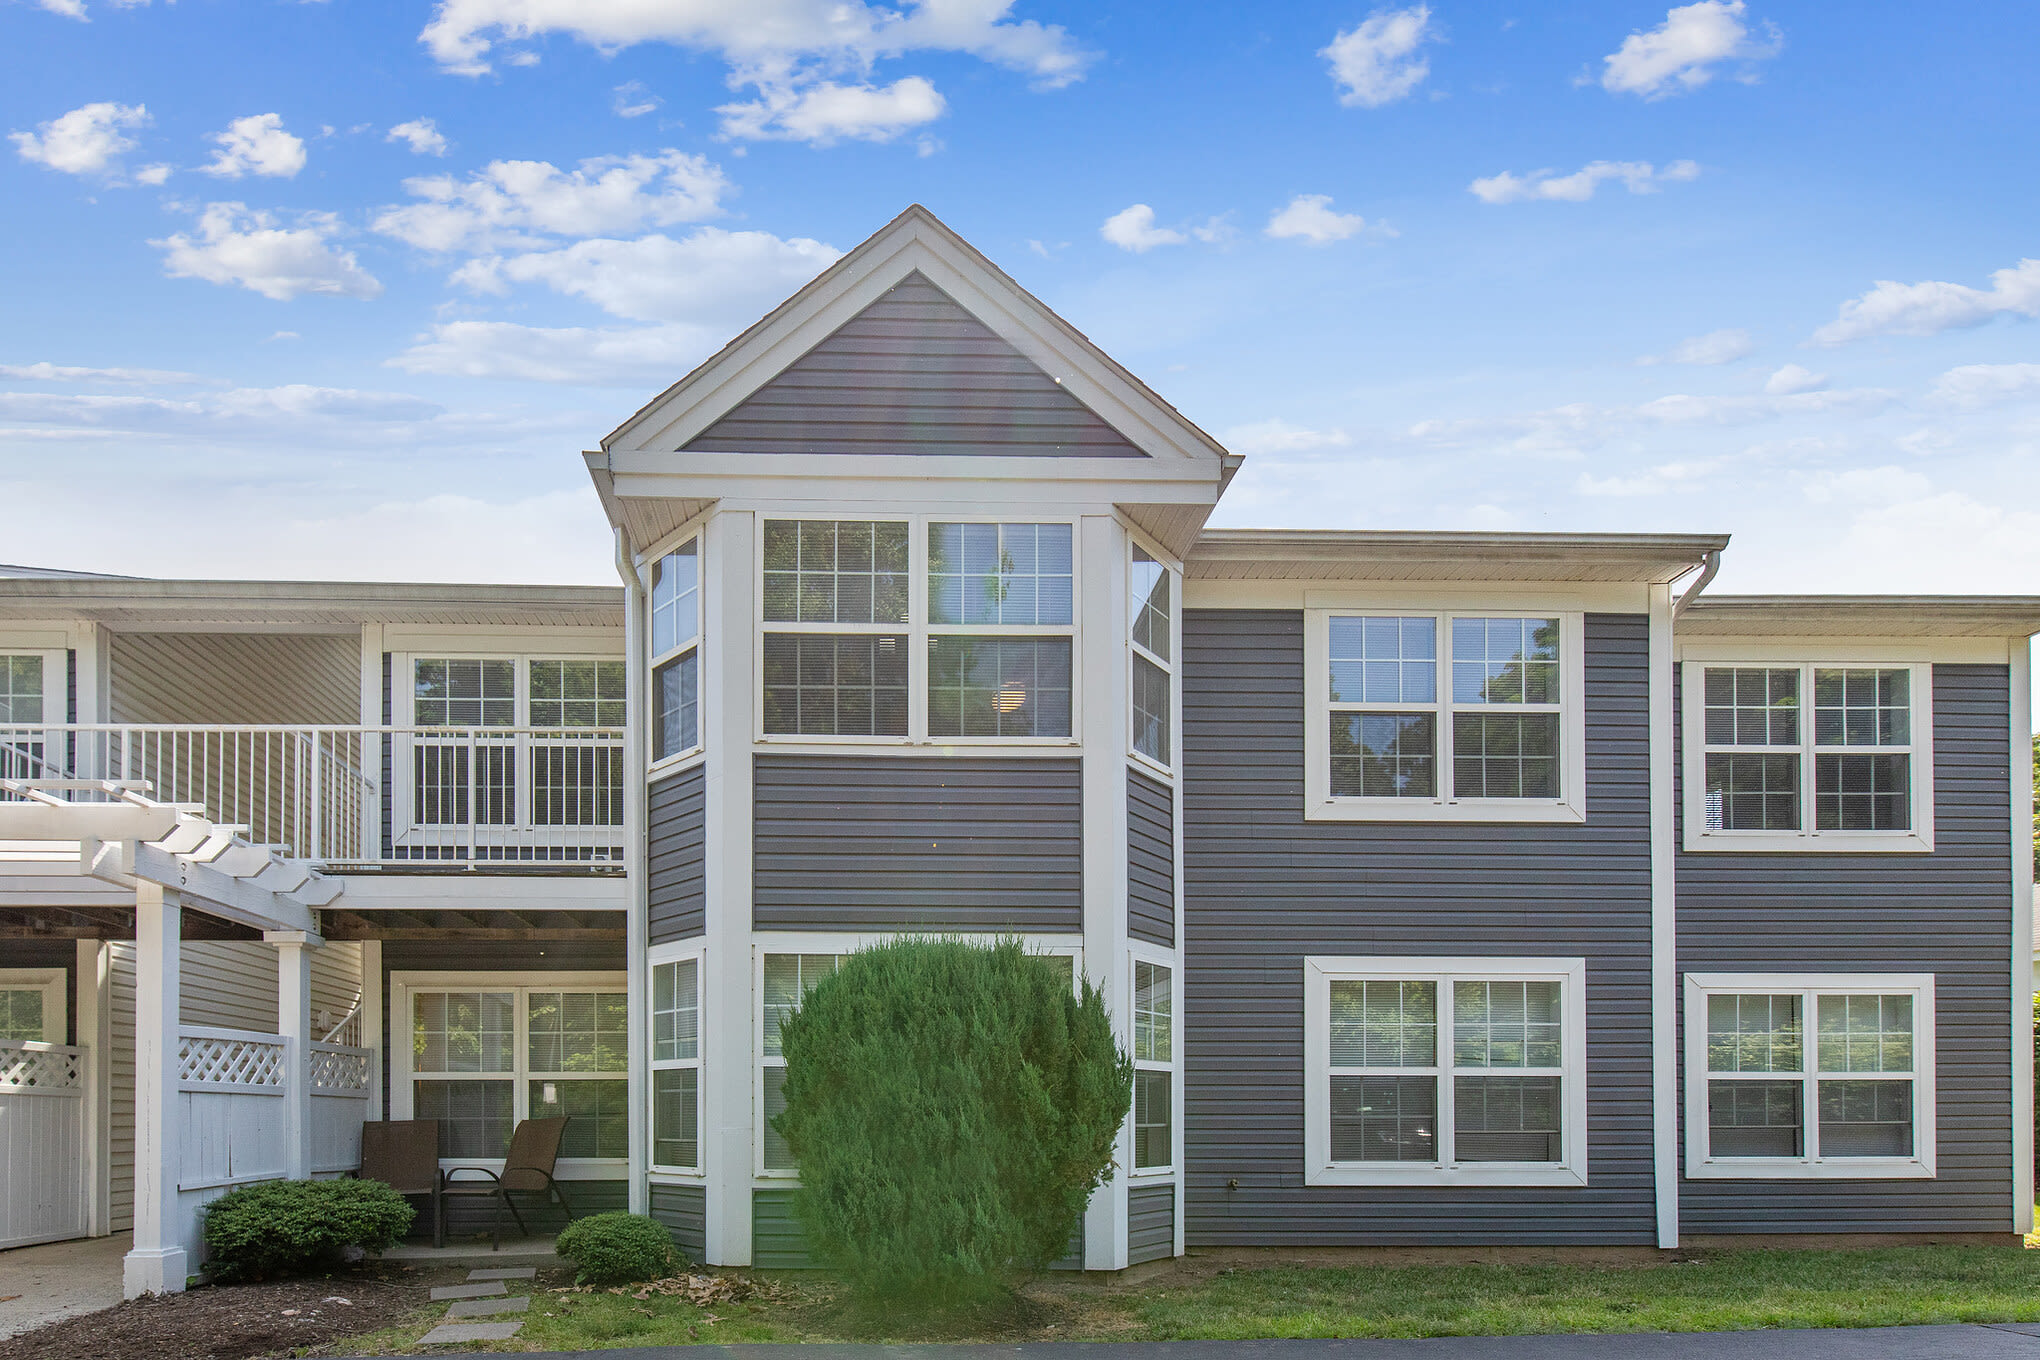 Our Modern Apartments in East Haven, Connecticut showcase exterior area